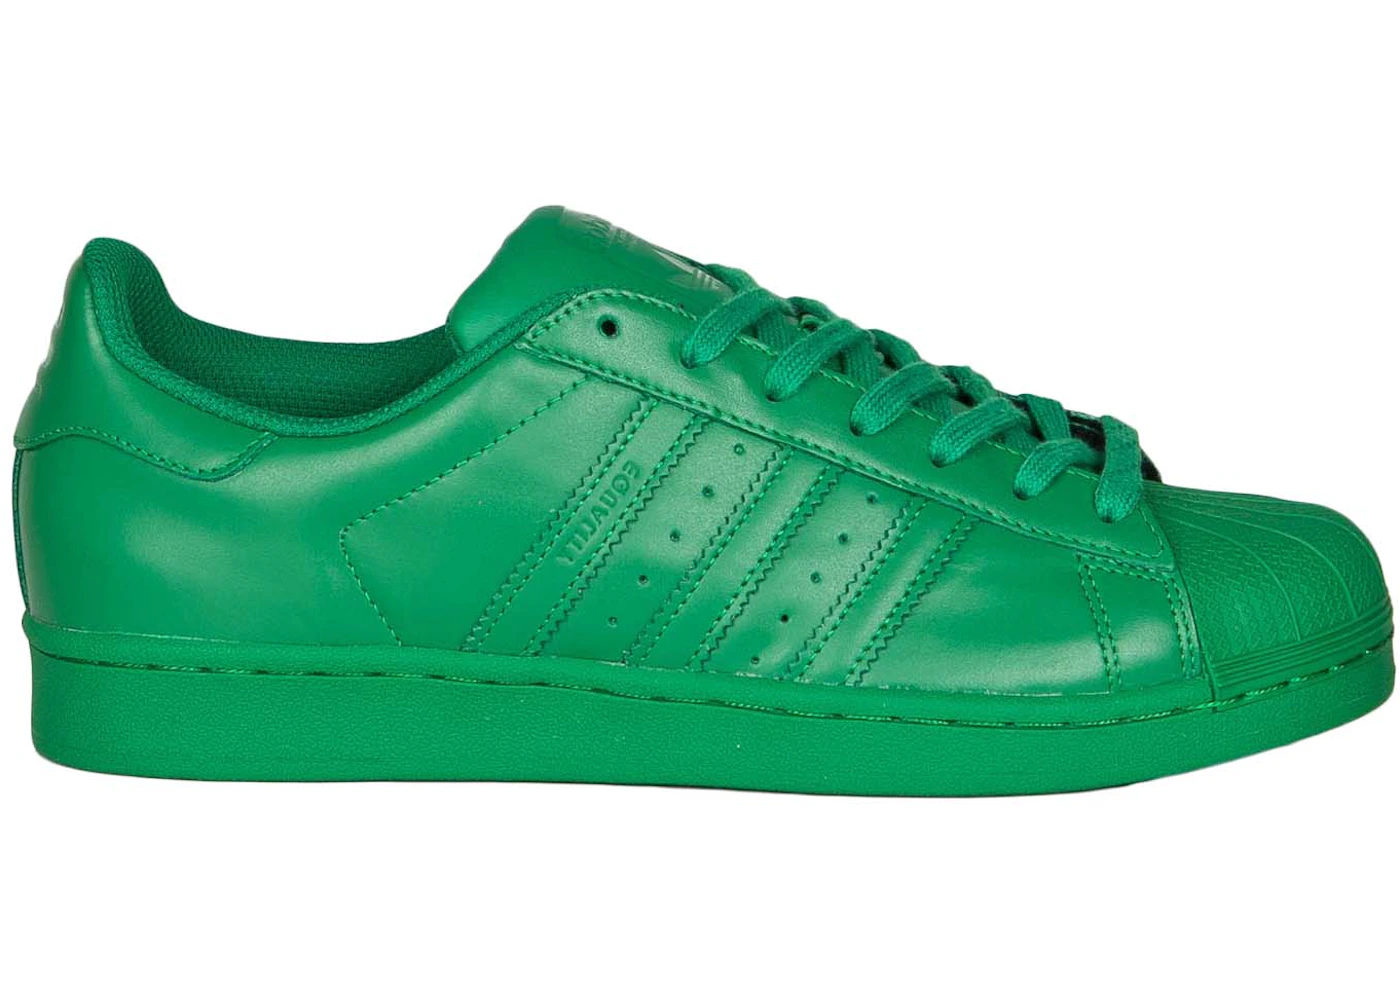 raya Cambiable pedal adidas Superstar Pharell Supercolor Pack Green Men's - S83389 - US